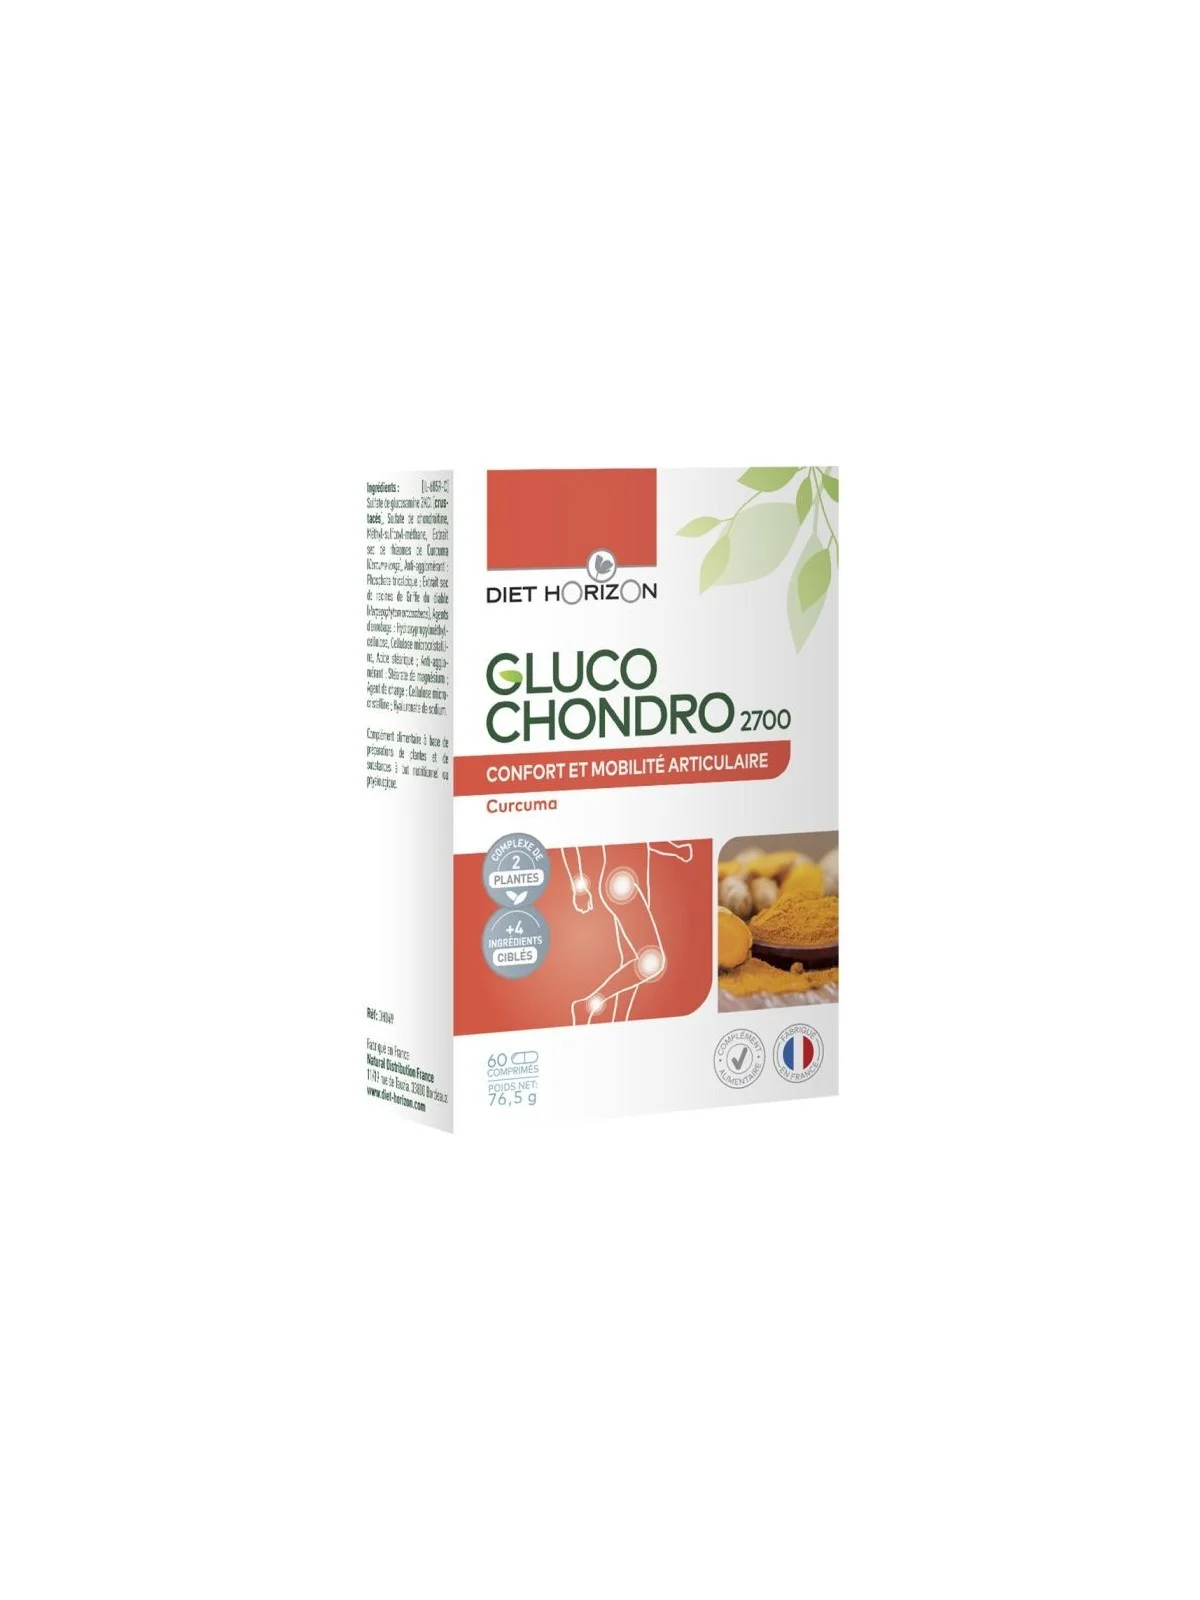 Gluco Chondro 2700 60cps - Confort articulaire Diet horizon